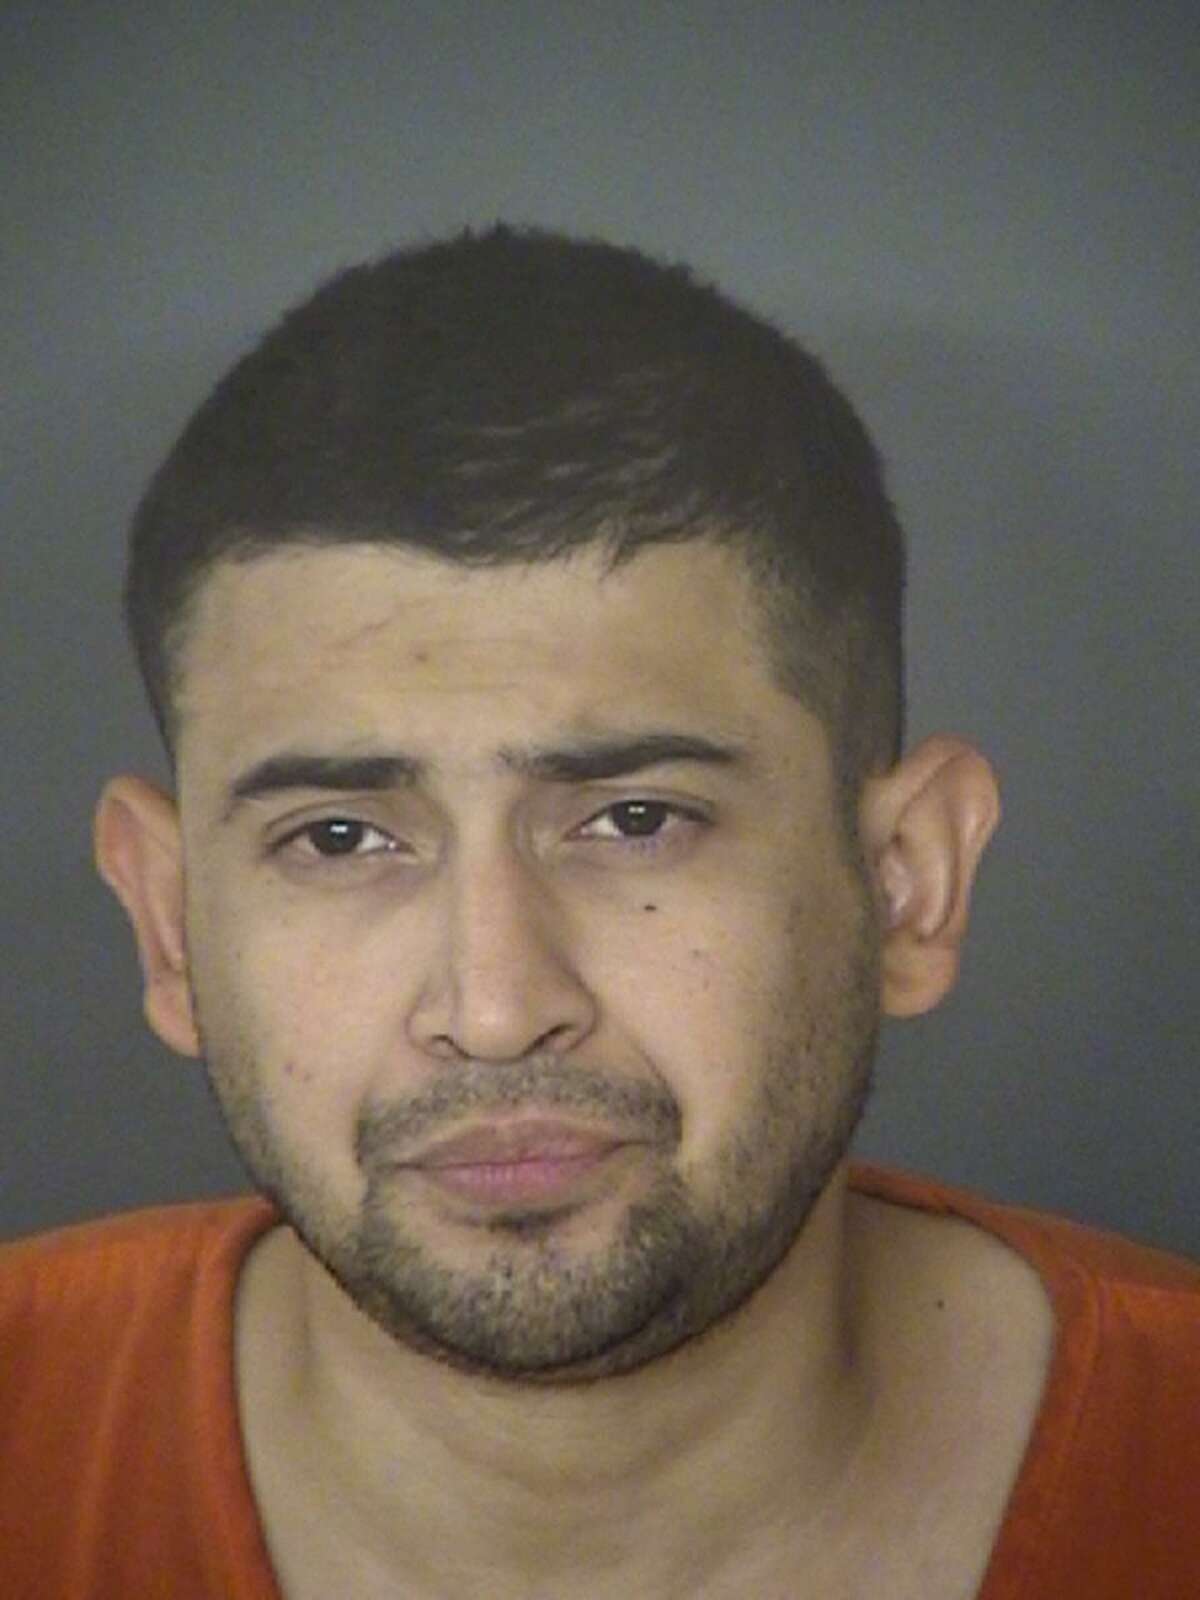 Ivan Castro, 33, was sentenced to 35 years in prison for fatally stabbing his mother in 2018.